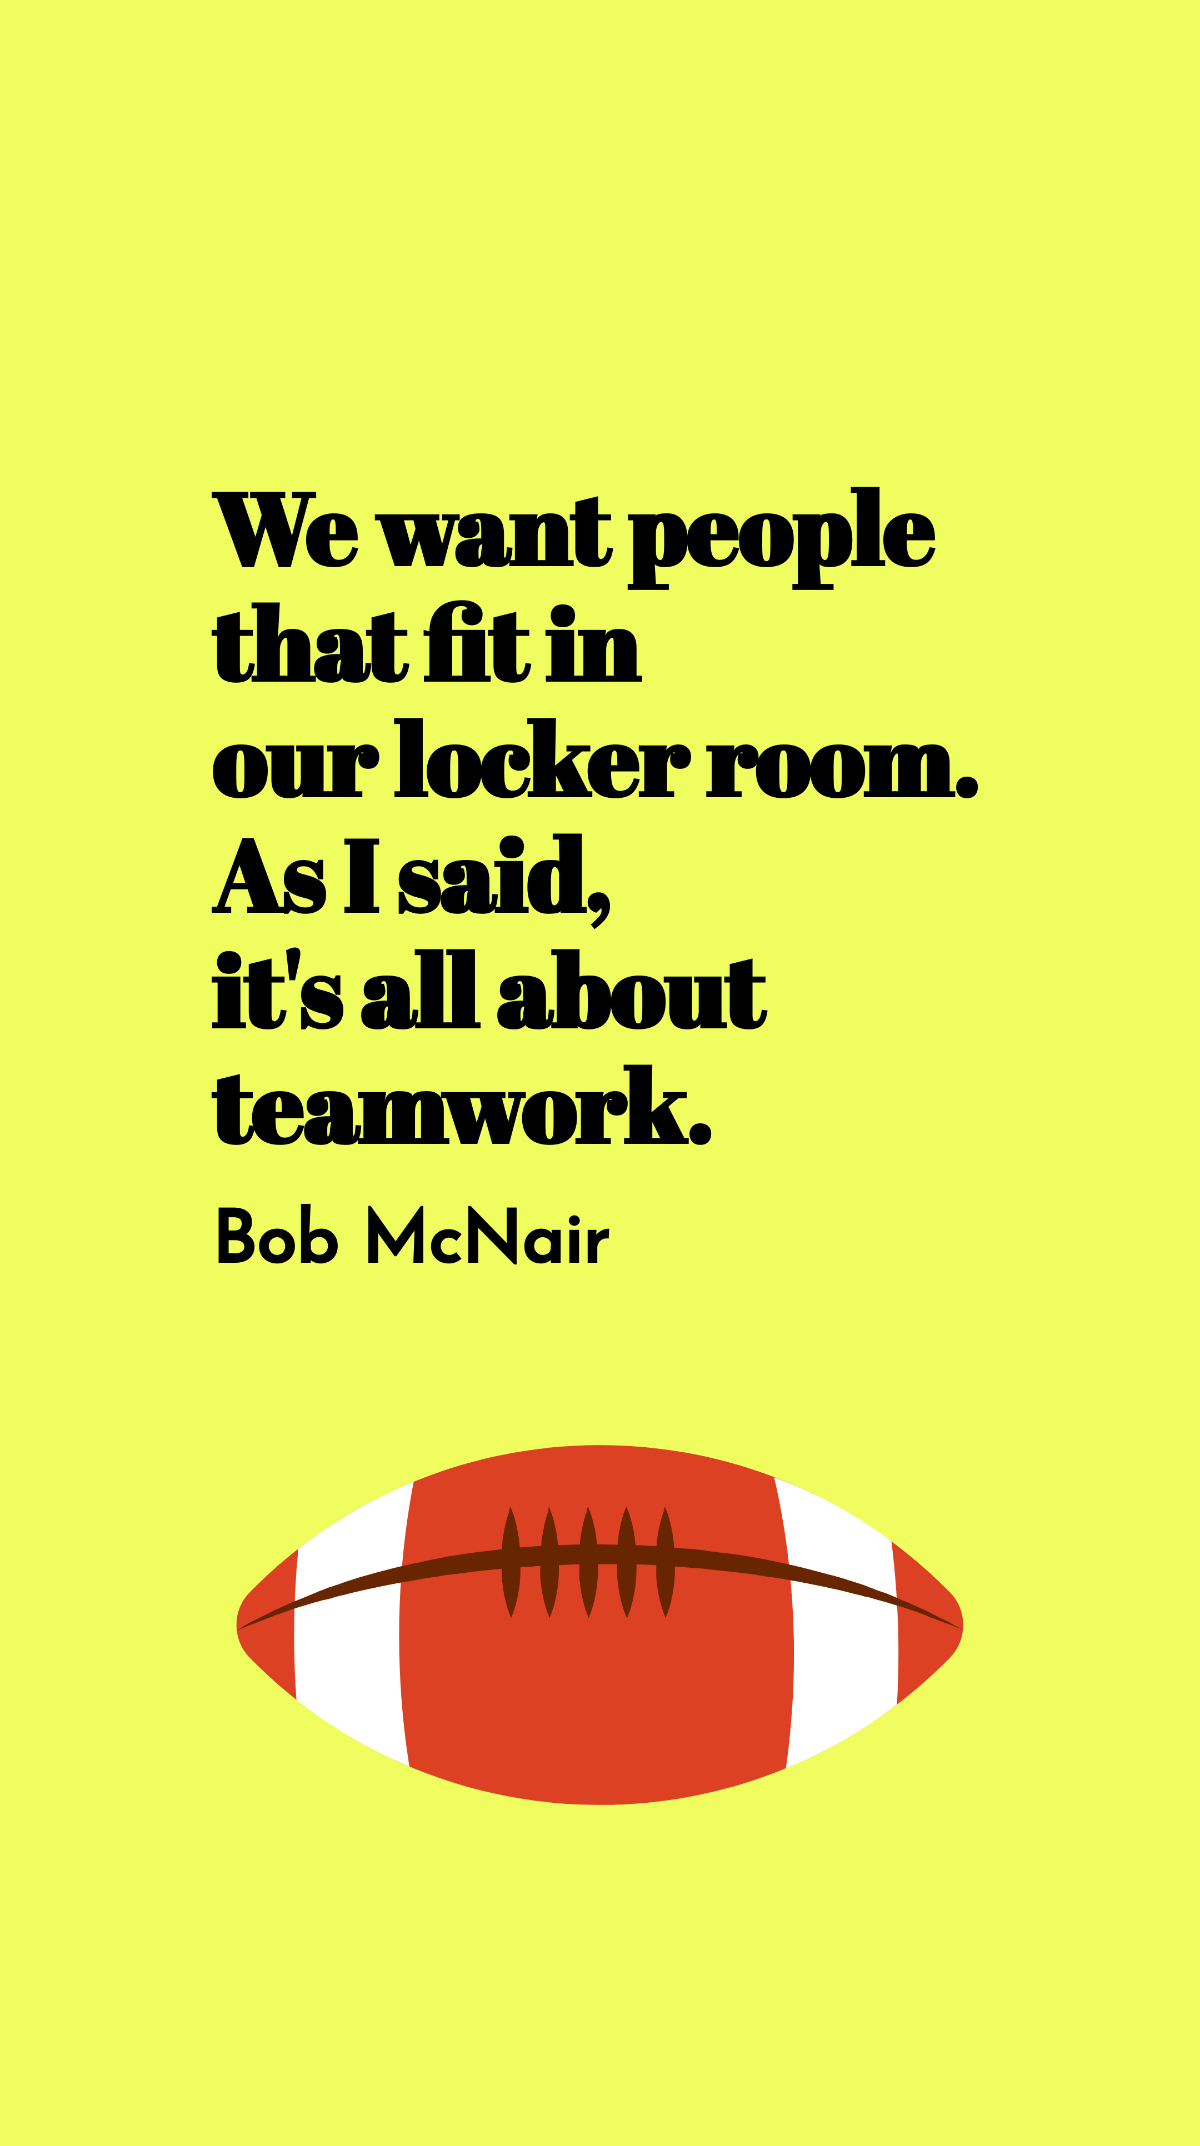 Bob McNair - We want people that fit in our locker room. As I said, it's all about teamwork.